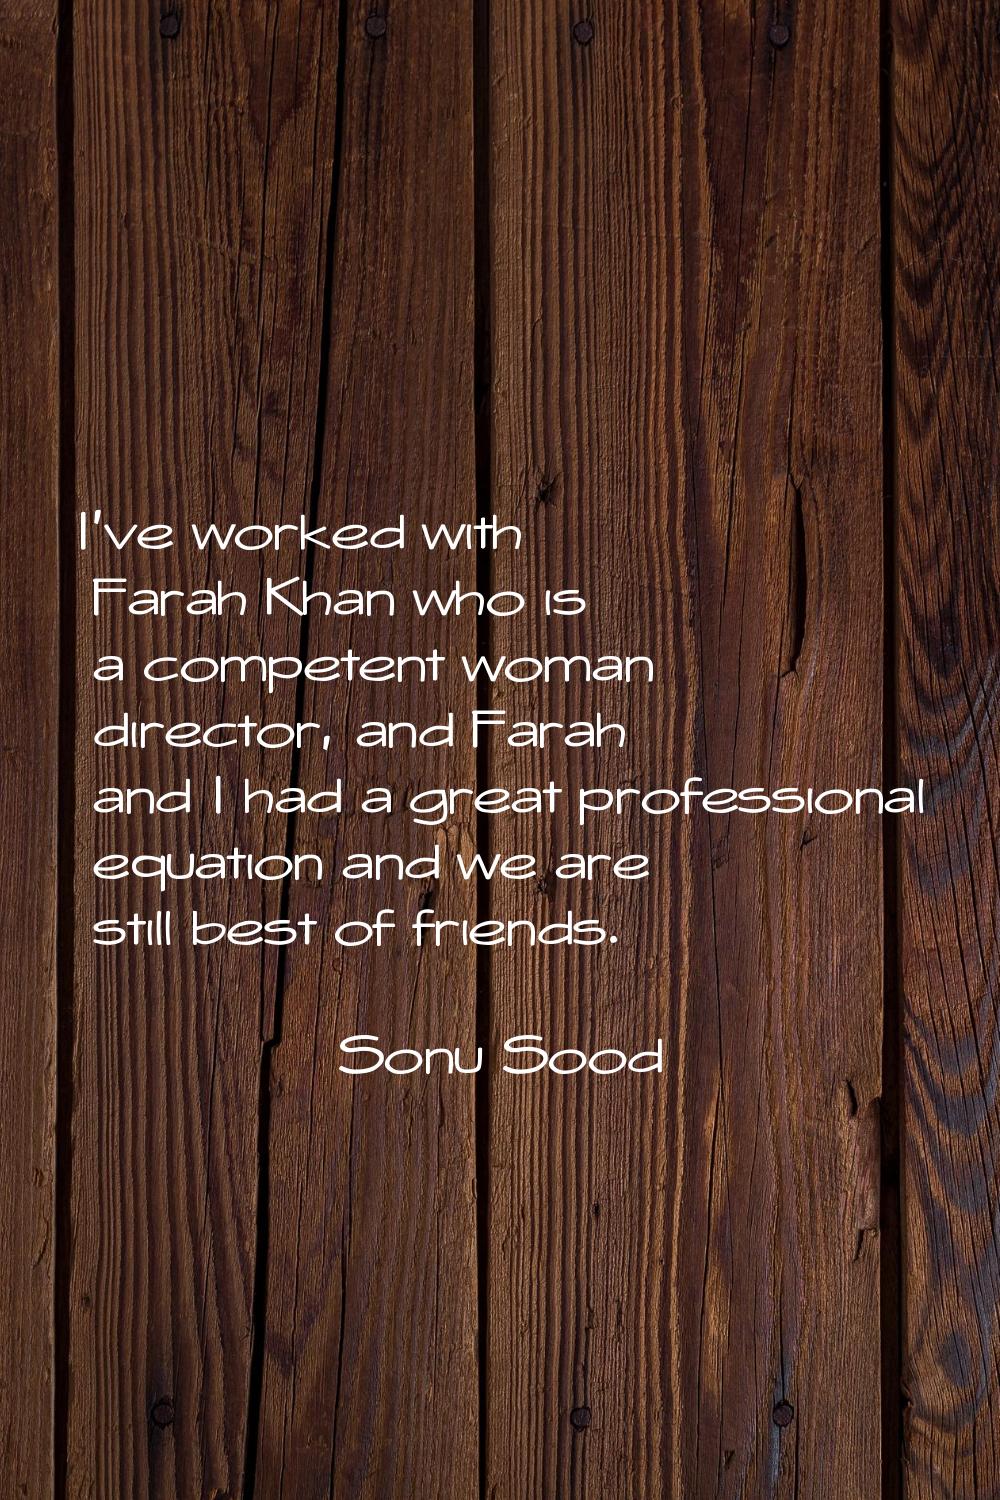 I've worked with Farah Khan who is a competent woman director, and Farah and I had a great professi